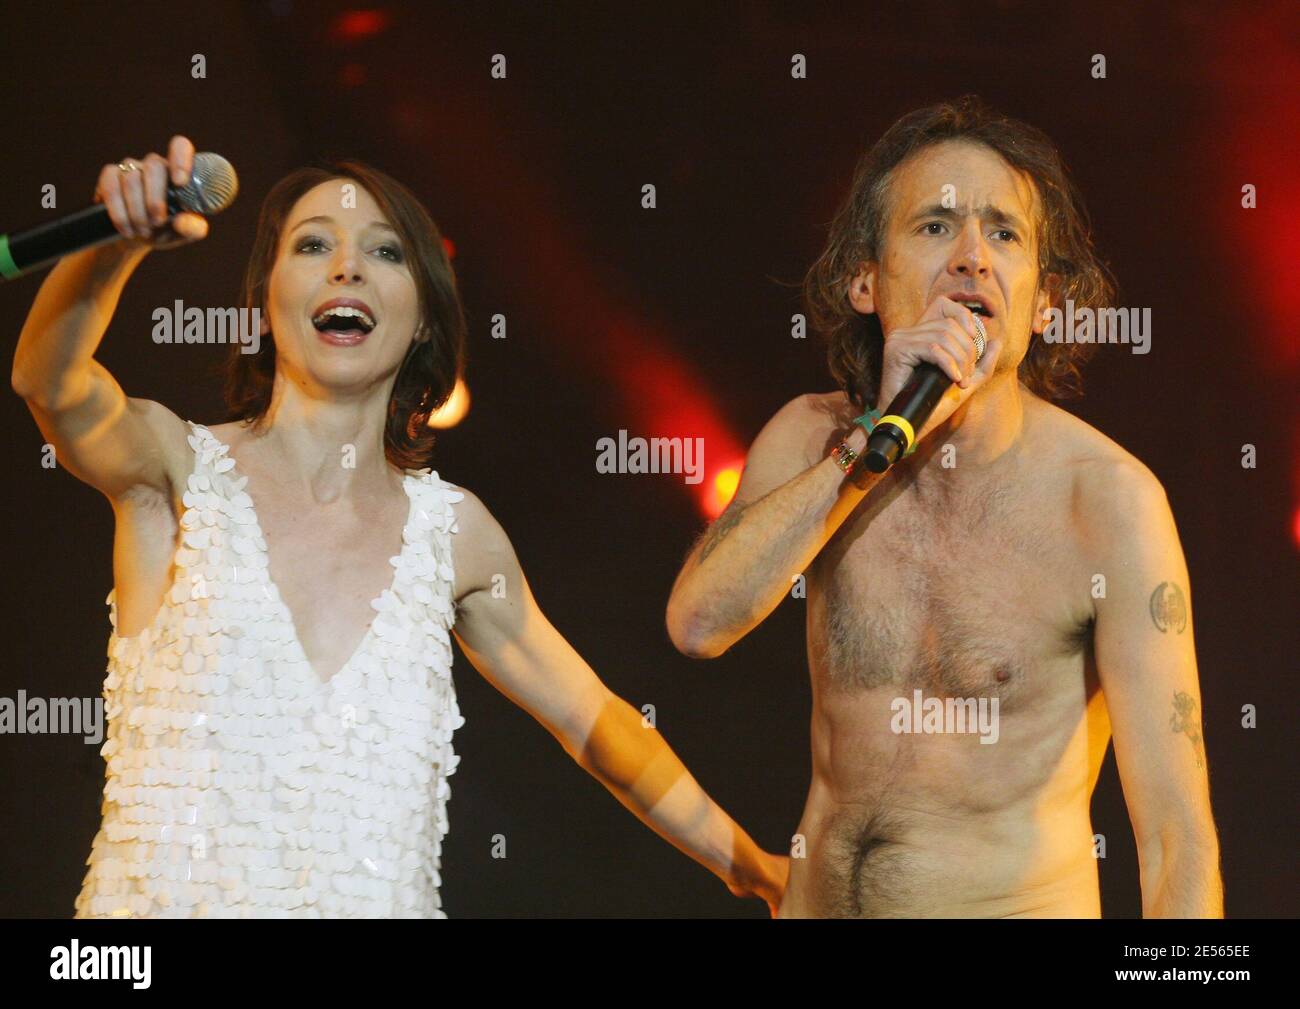 Jeanne Cherhal and Didier Wampas live on stage on the second day of the annual AIDS charity and fundraising music festival 'Solidays', held at Longchamp racetrack in Paris, France, on July 5, 2008. Photo by Denis Guignebourg/ABACAPRESS.COM Stock Photo